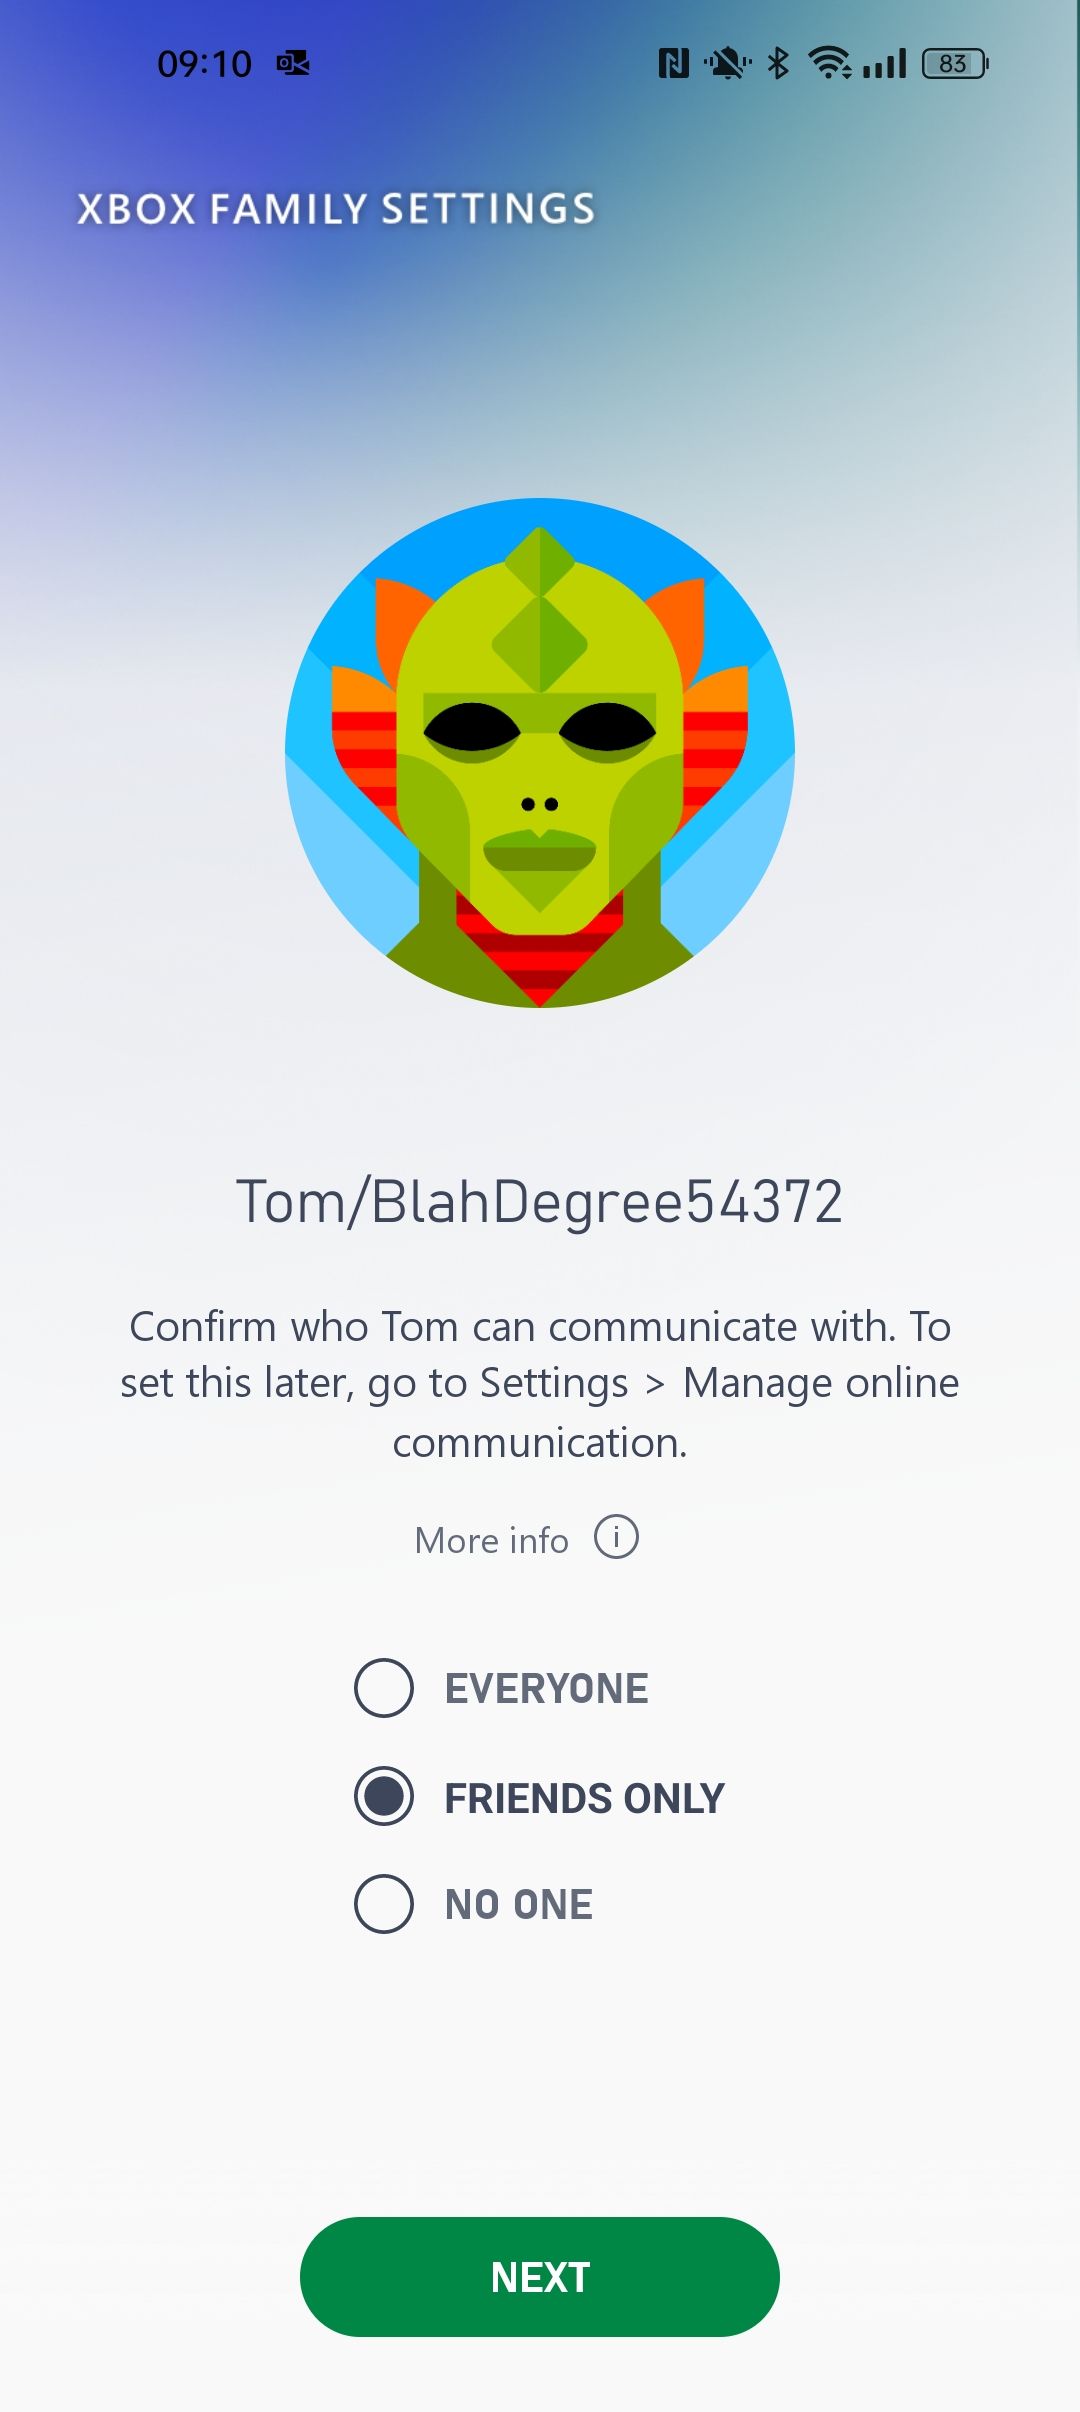 A screenshot of the Xbox Family Settings app highlighting communication preferences for a new family member